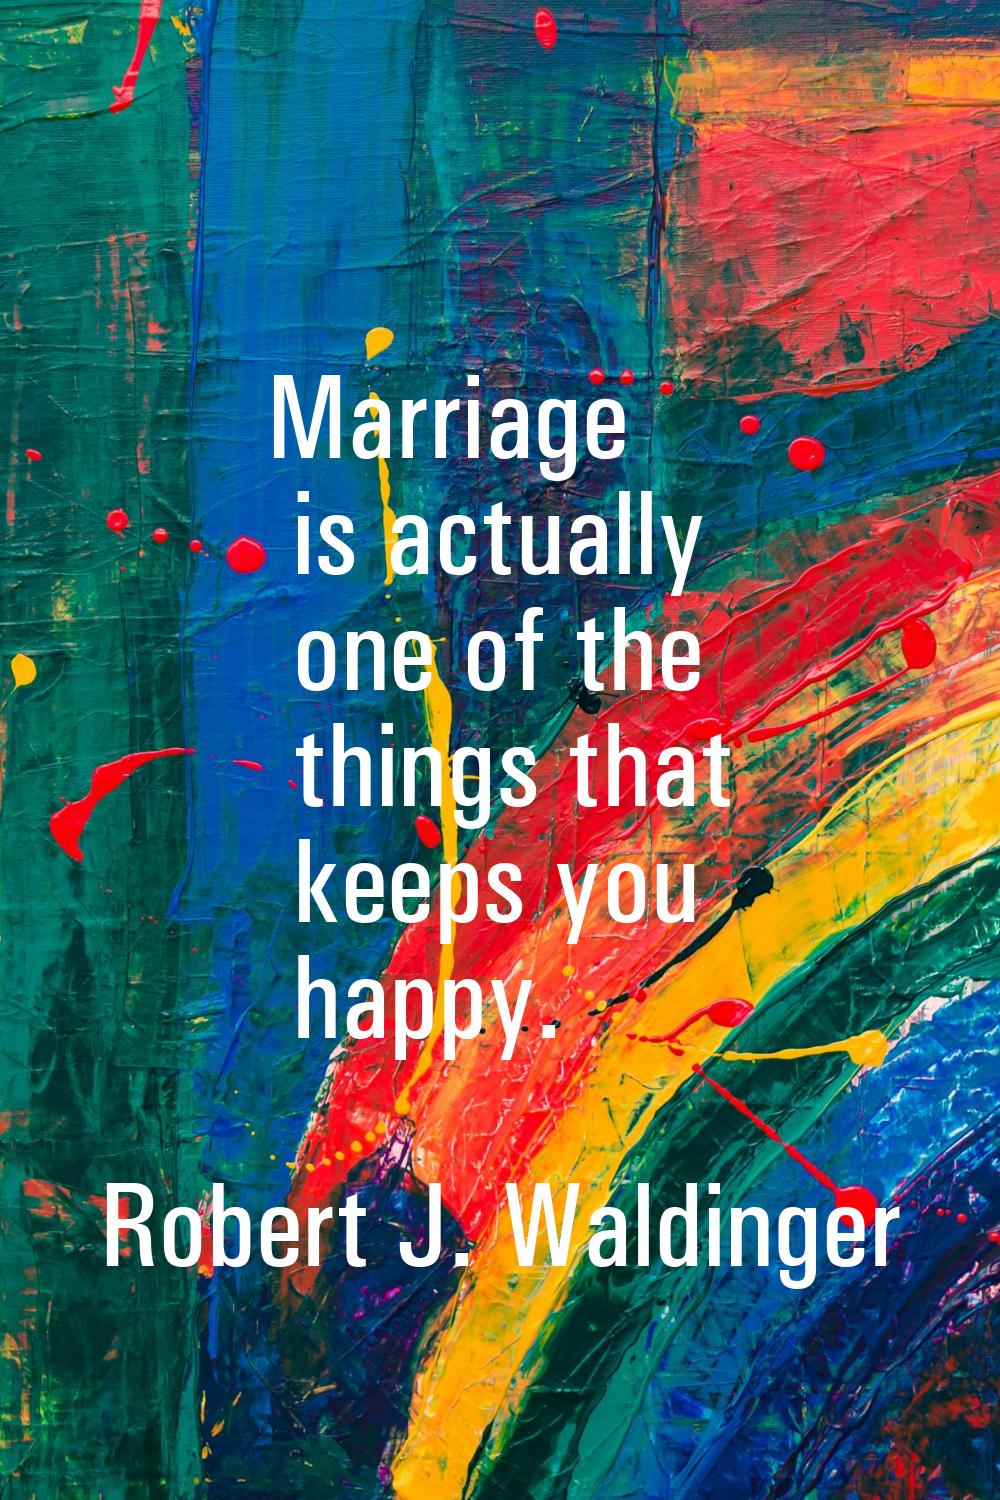 Marriage is actually one of the things that keeps you happy.